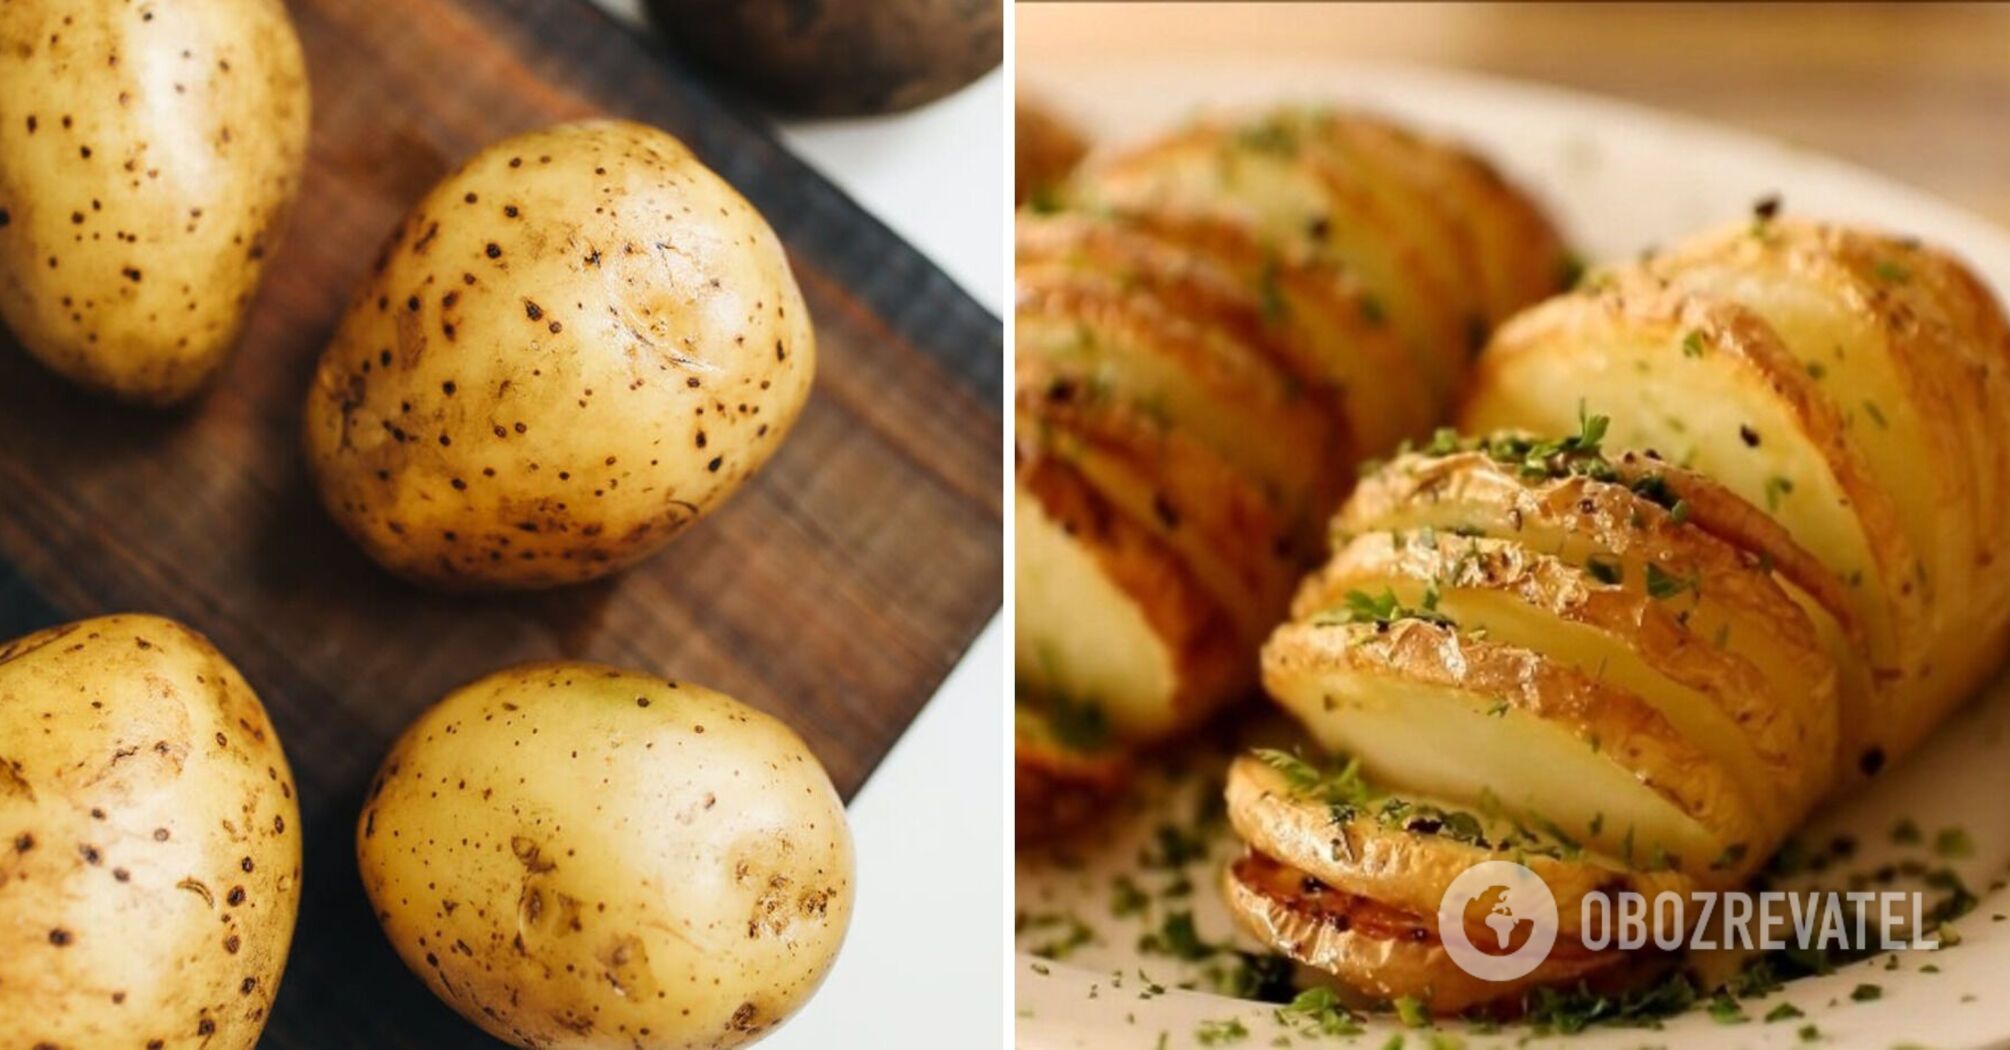 Gourmet potato dinner: you only need 4 ingredients